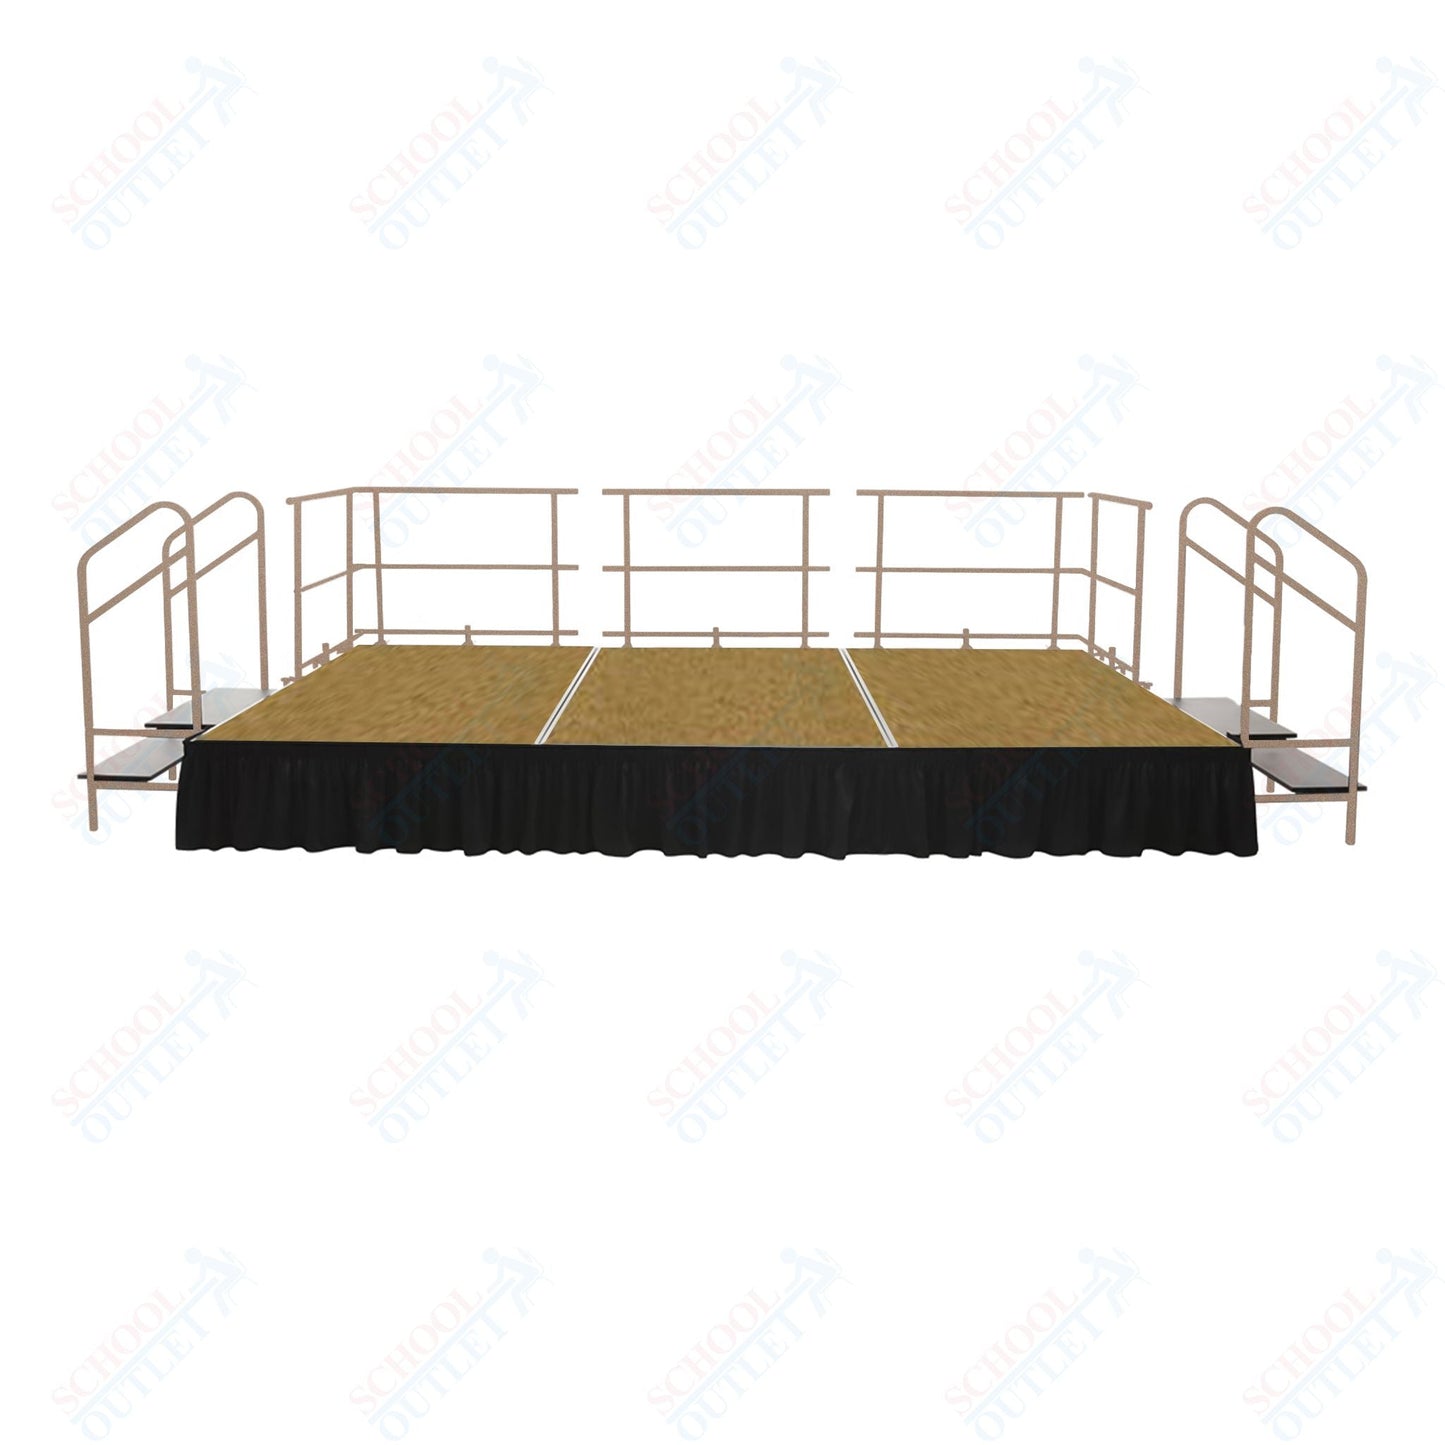 AmTab Fixed Height Stage Set - Hardboard Top - 16'W x 32'L x 2'H (192"W x 384"L x 24"H) (AmTab AMT - STS163224H) - SchoolOutlet